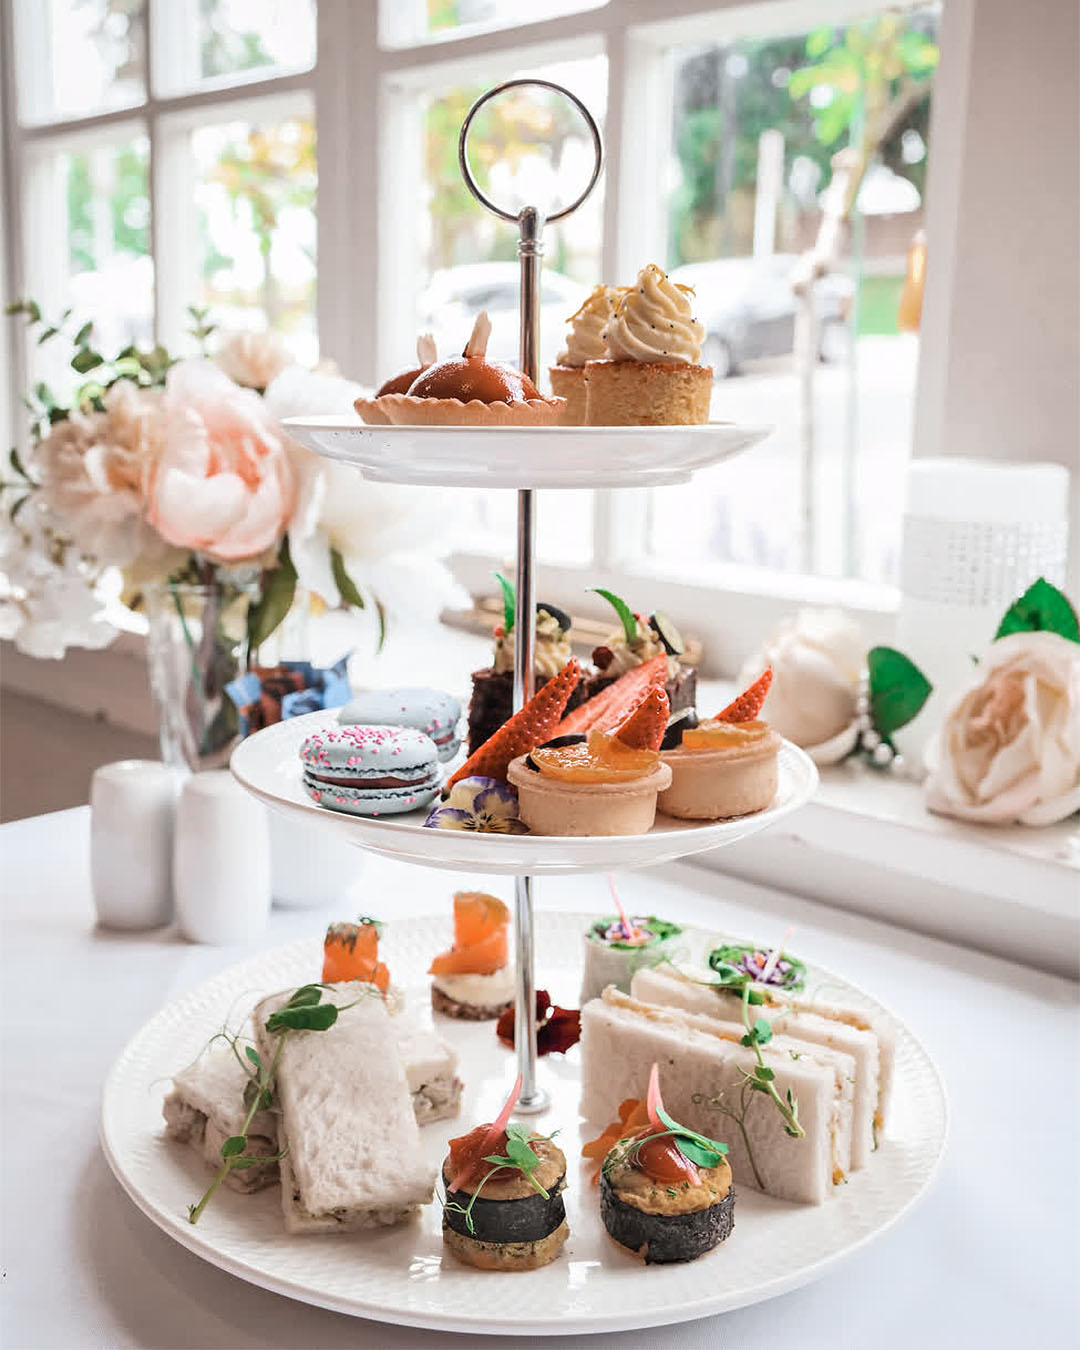 A highly visually-appealing high tea at The Pavilion wintergarden cafe.